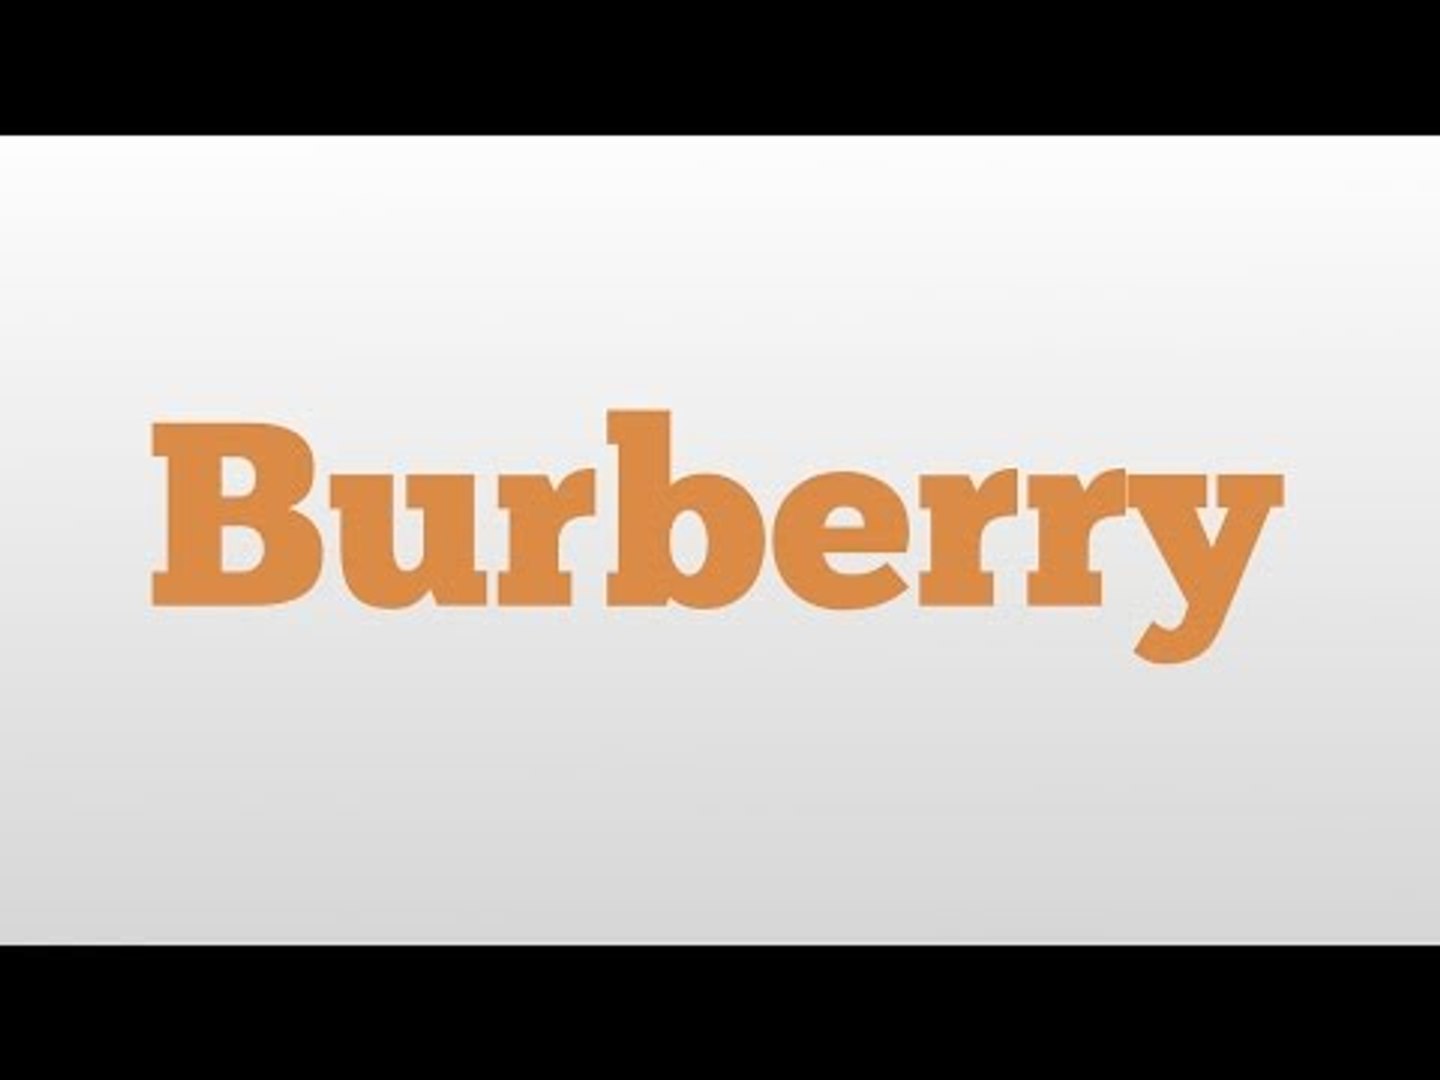 Burberry meaning and pronunciation